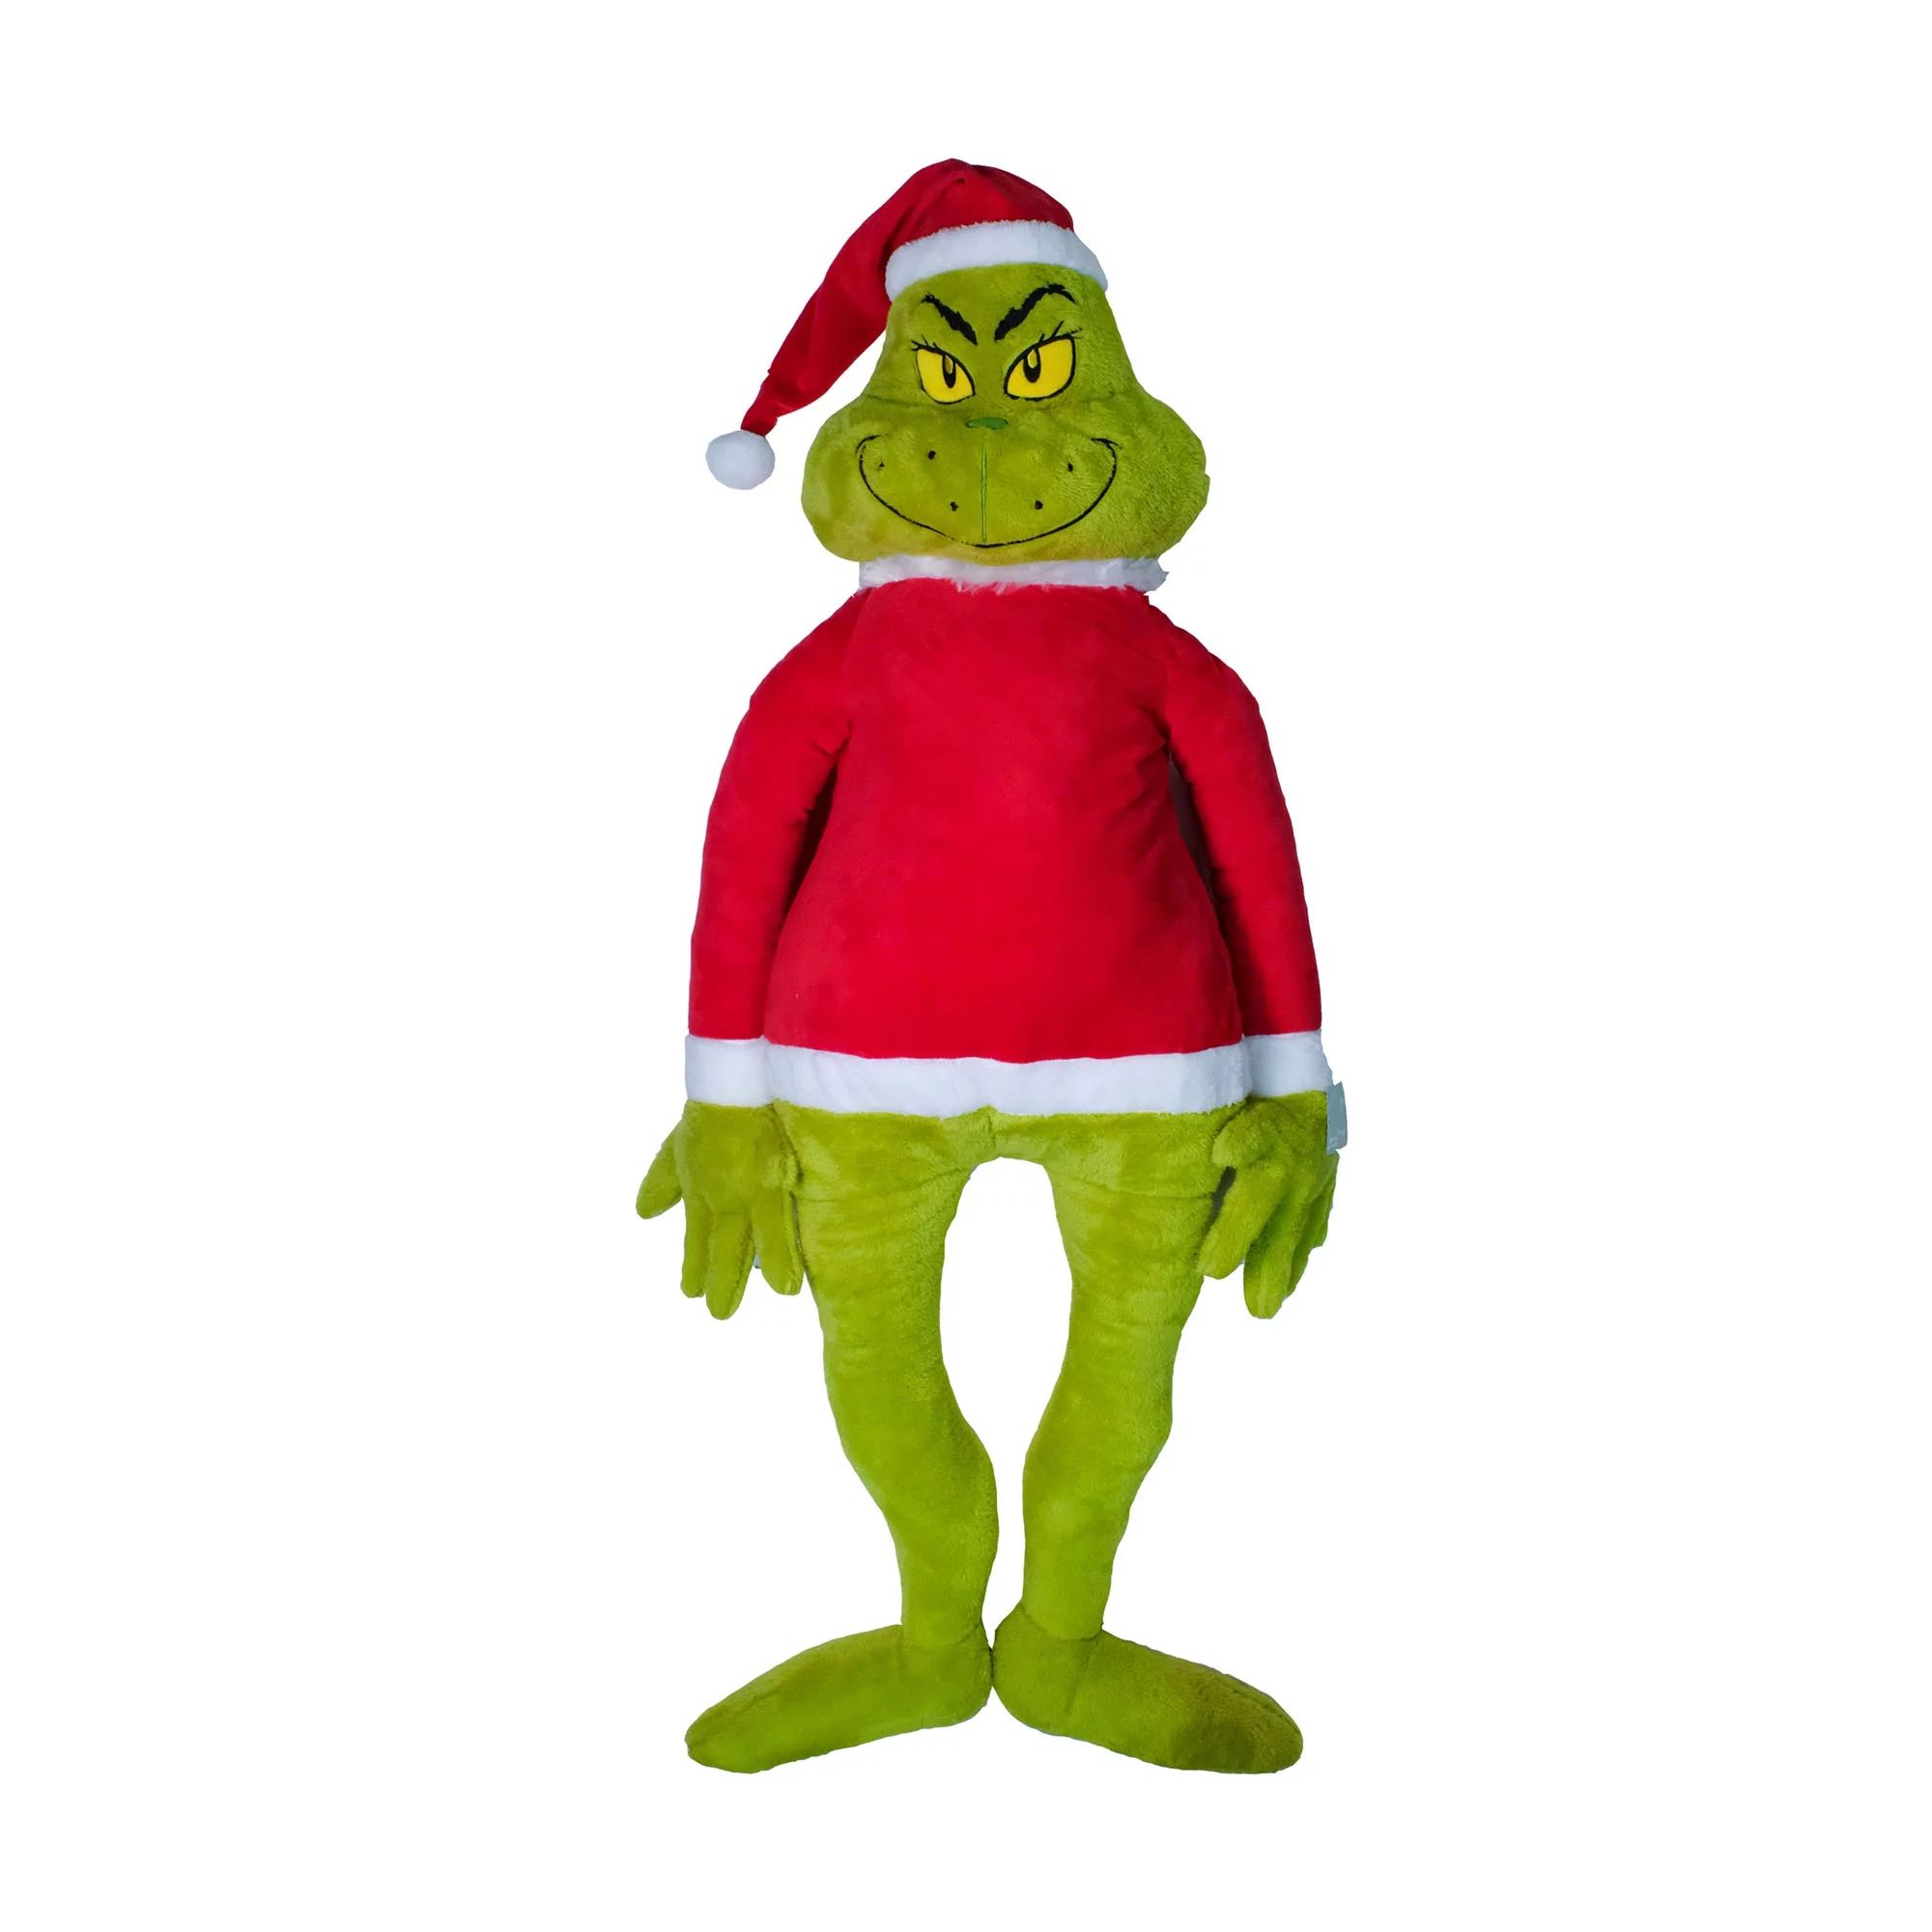 Dr Seuss' "The Grinch Who Stole Christmas", Grinch Jumbo 48 inch Tall Plush, Green, All Ages | Walmart (US)